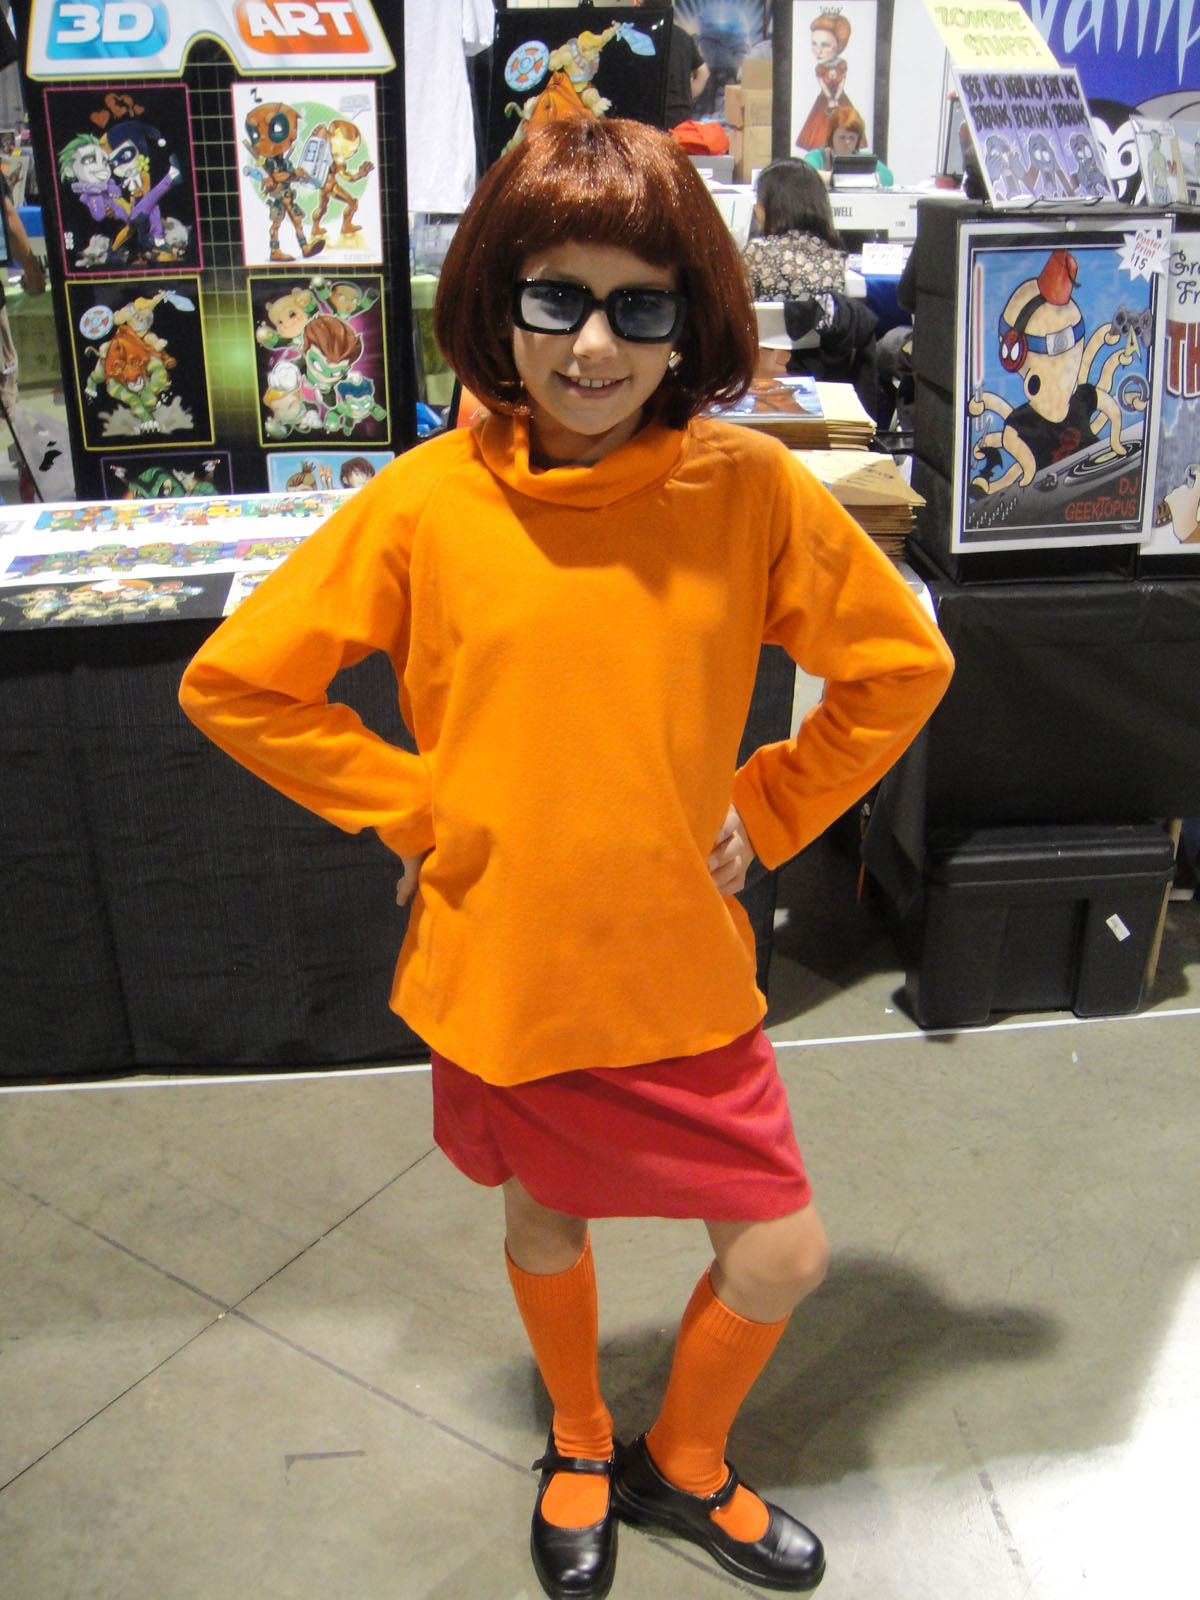 a person in orange and black is standing